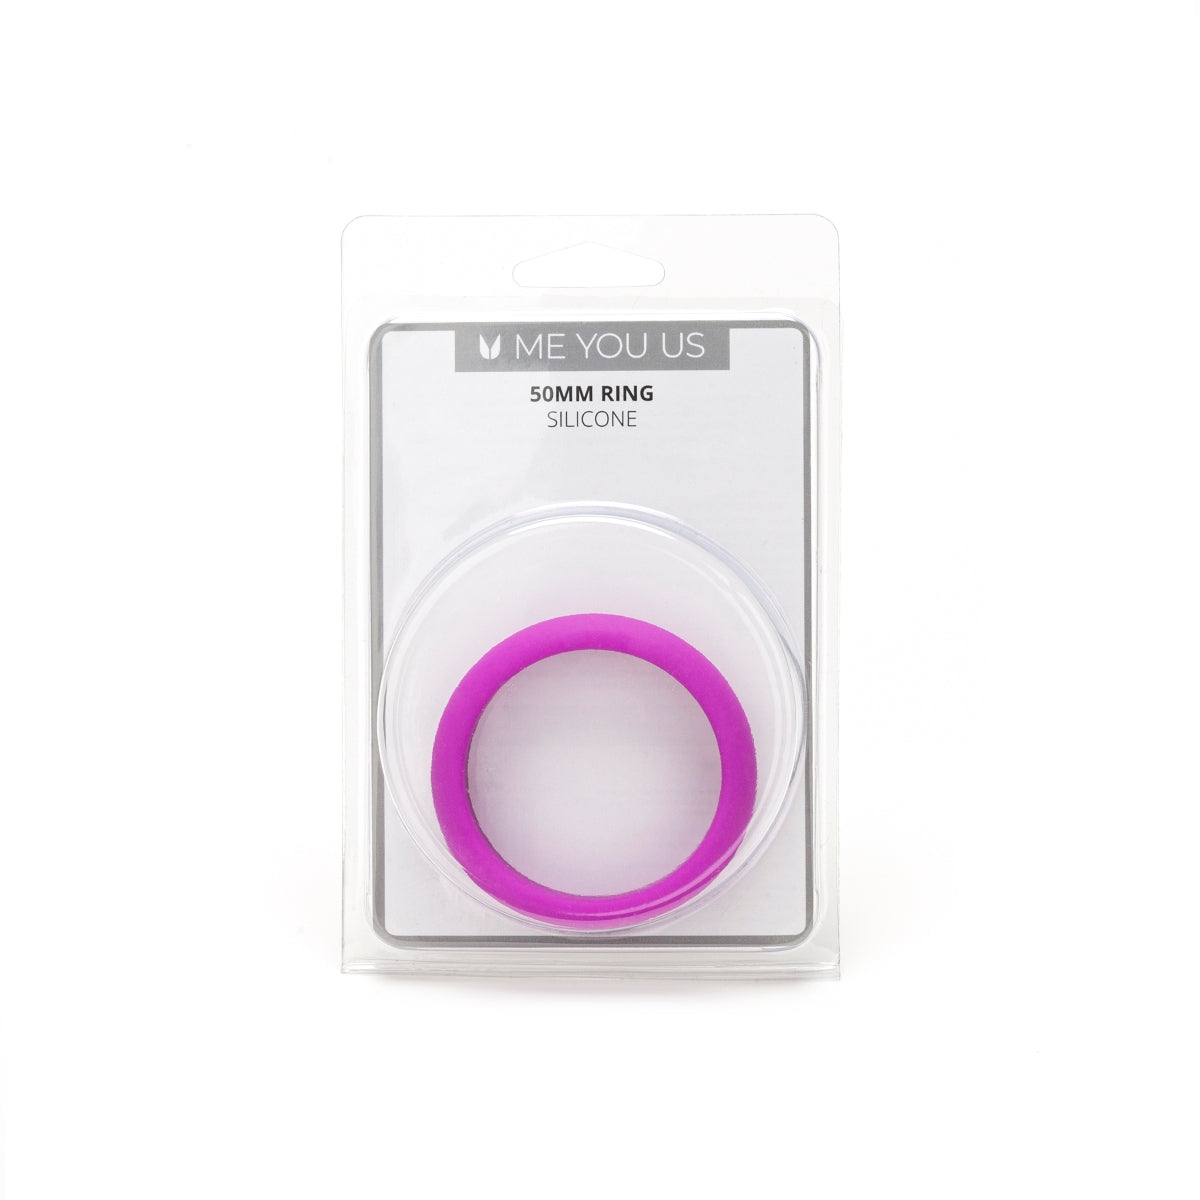 a pink ring in a package on a white background